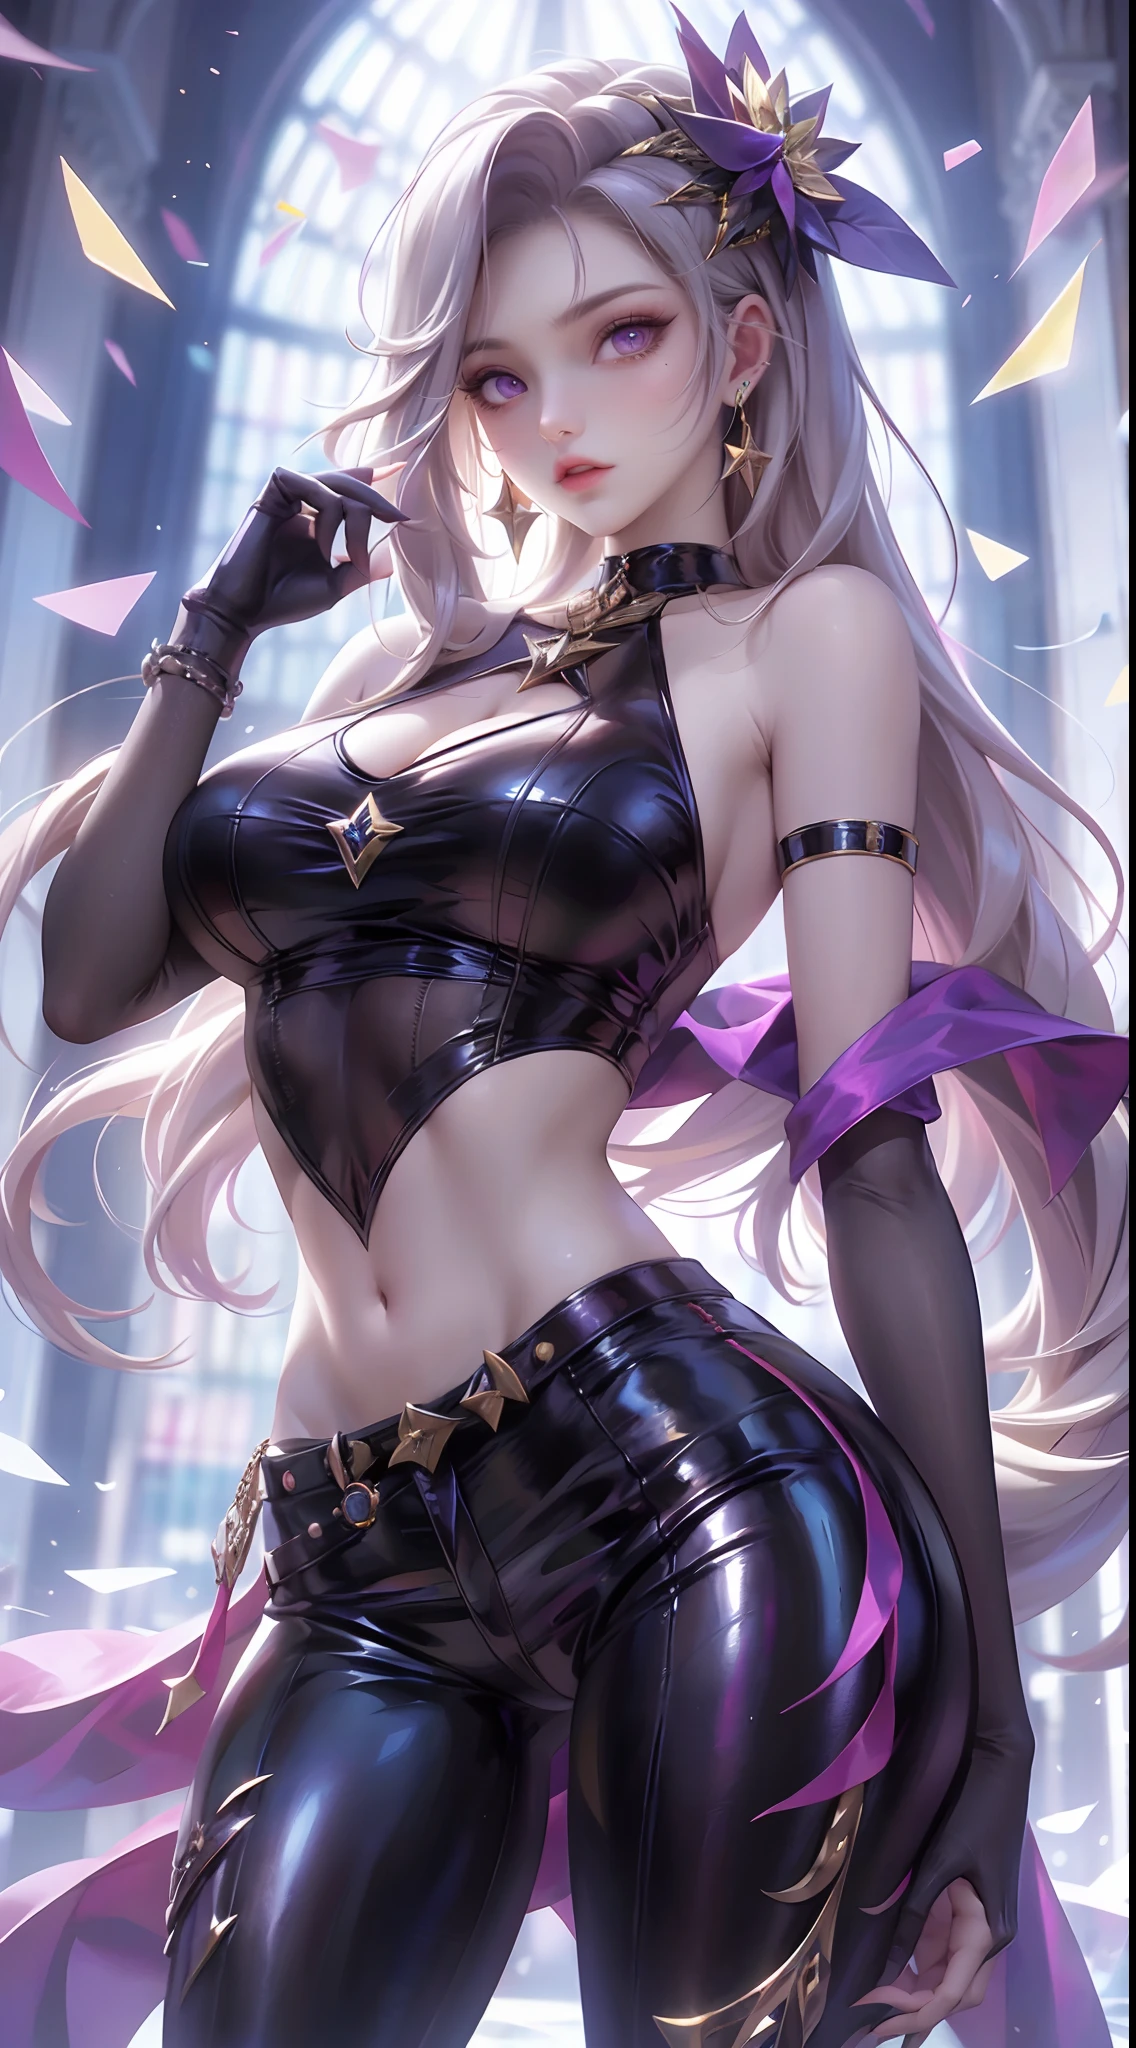 「En una impresionante Masterpiece en forma de retrato、Showcasing the highest quality art。The theme of this artwork is、It&#39;s a girl captured in amazing detail。」Pixiv Anime Realism Trends、Shibitai Perfect Body Perfect Face、Hands not visible、shot from the waist up、gigantic chest、Minamoto of the Grand Order of Fate、Signature fitted purple suit、More detailed 8K.unreal engine:1.4,UHD,La Best Quality:1.4, photorealistic:1.4, skin texture:1.4, Masterpiece:1.8,first work, Best Quality,object object], (detailed face features:1.4),(Eyes:1.4)